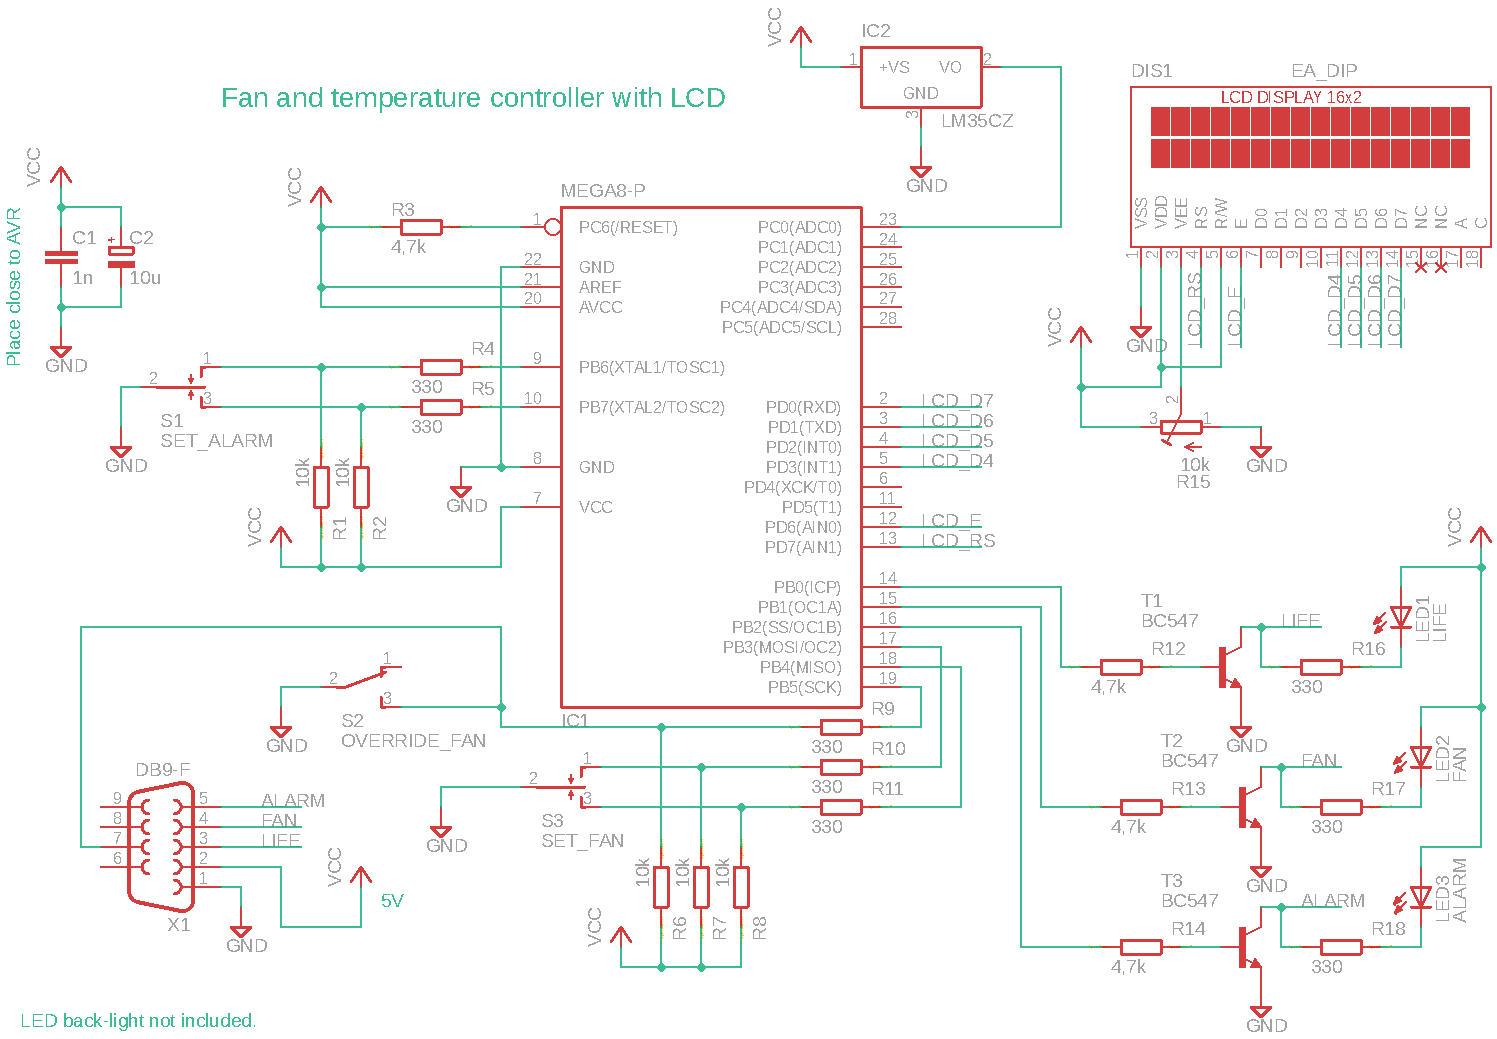 Schematics for the fan controller